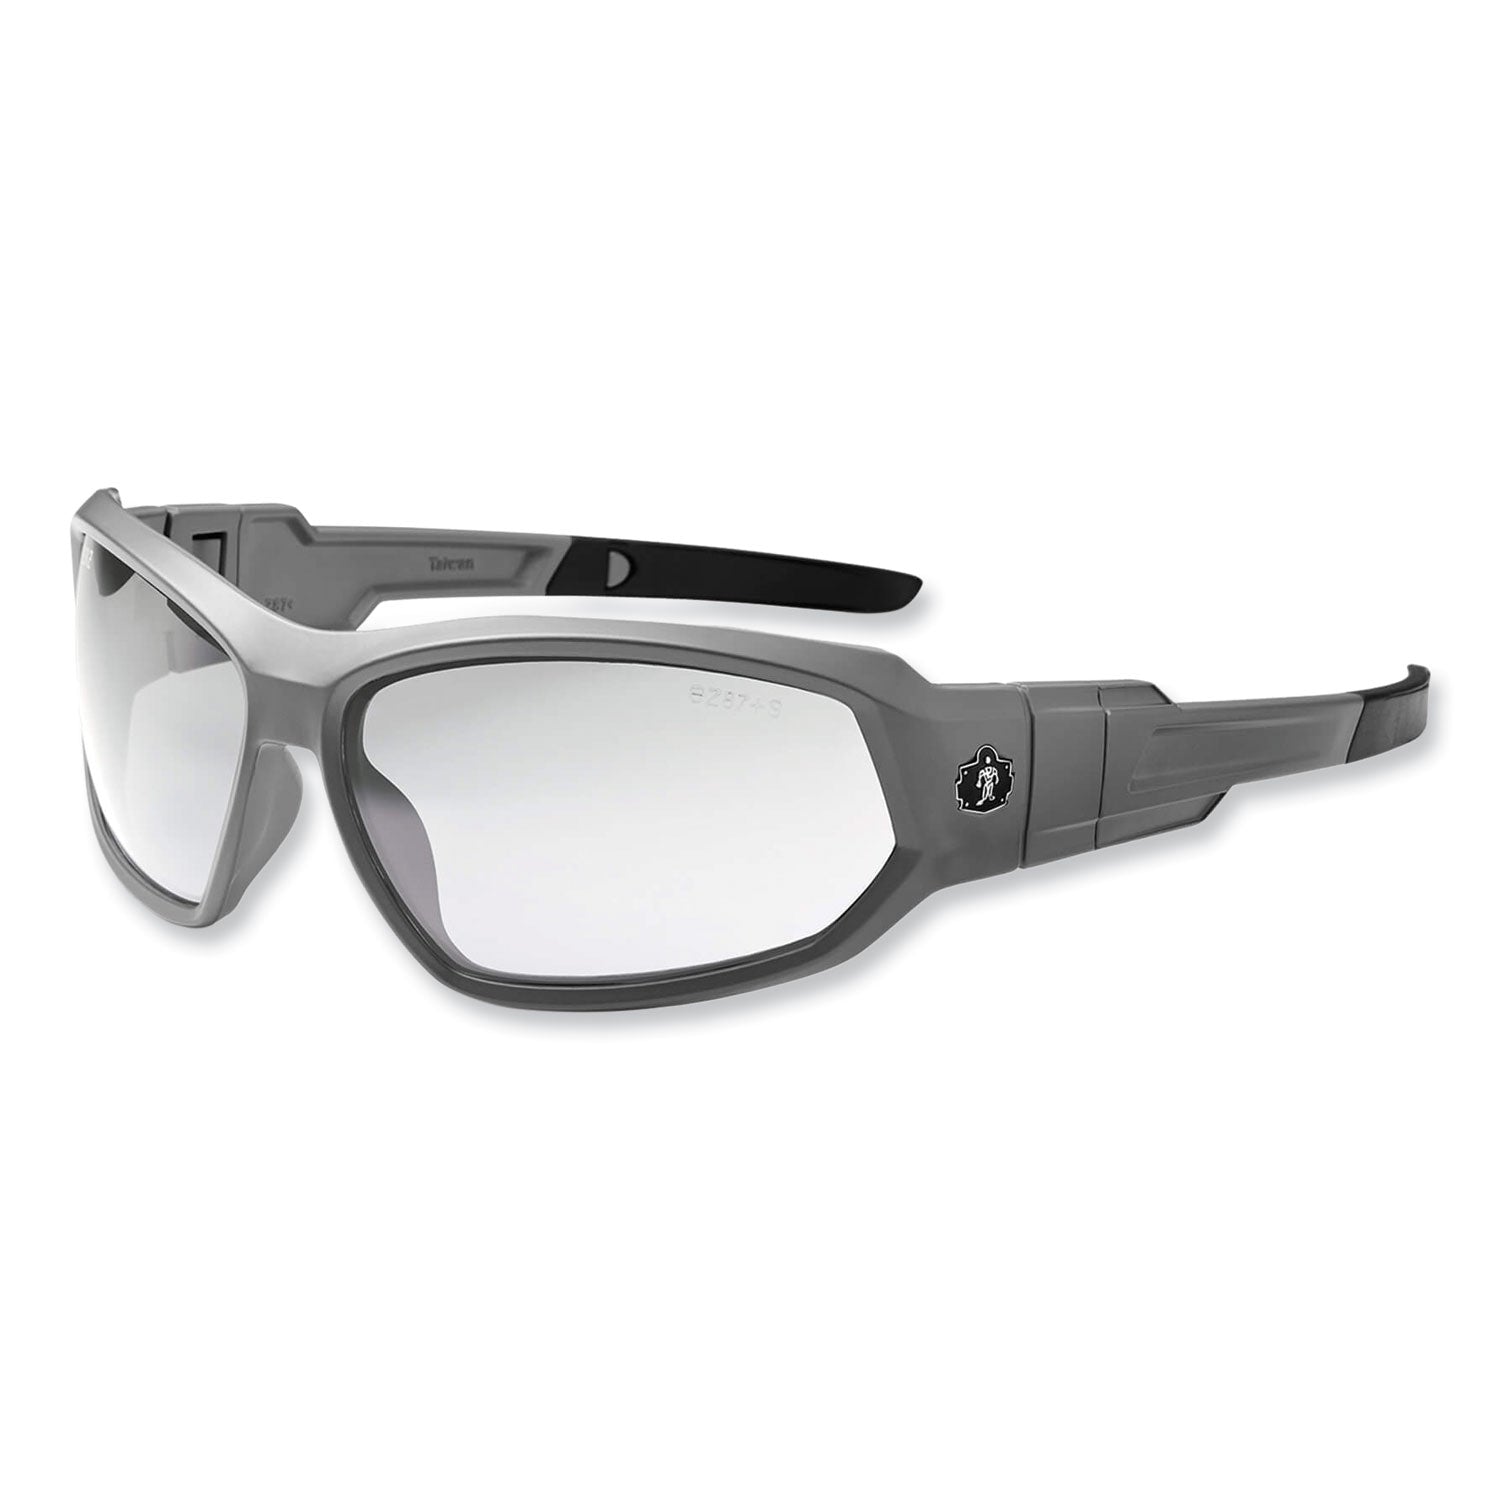 skullerz-loki-safety-glasses-goggles-matte-gray-nylon-impact-frame-anti-fog-clear-polycarb-lens-ships-in-1-3-business-days_ego56103 - 5